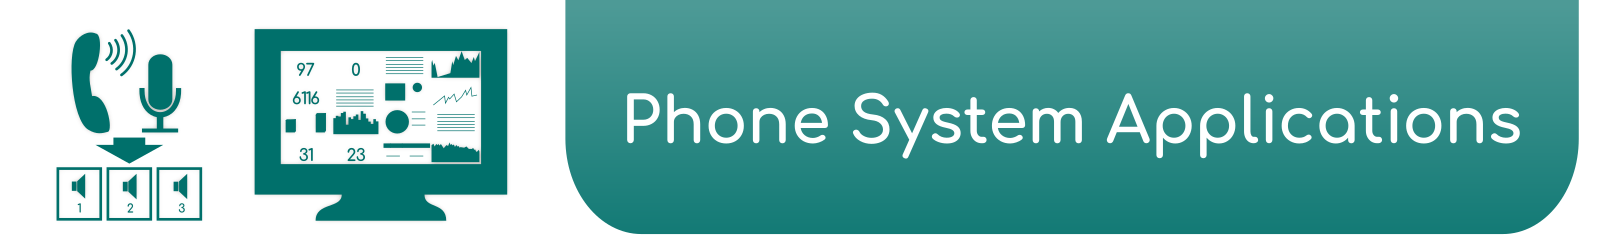 On-Premise Business Phone System Applications - Electronic Communication Services